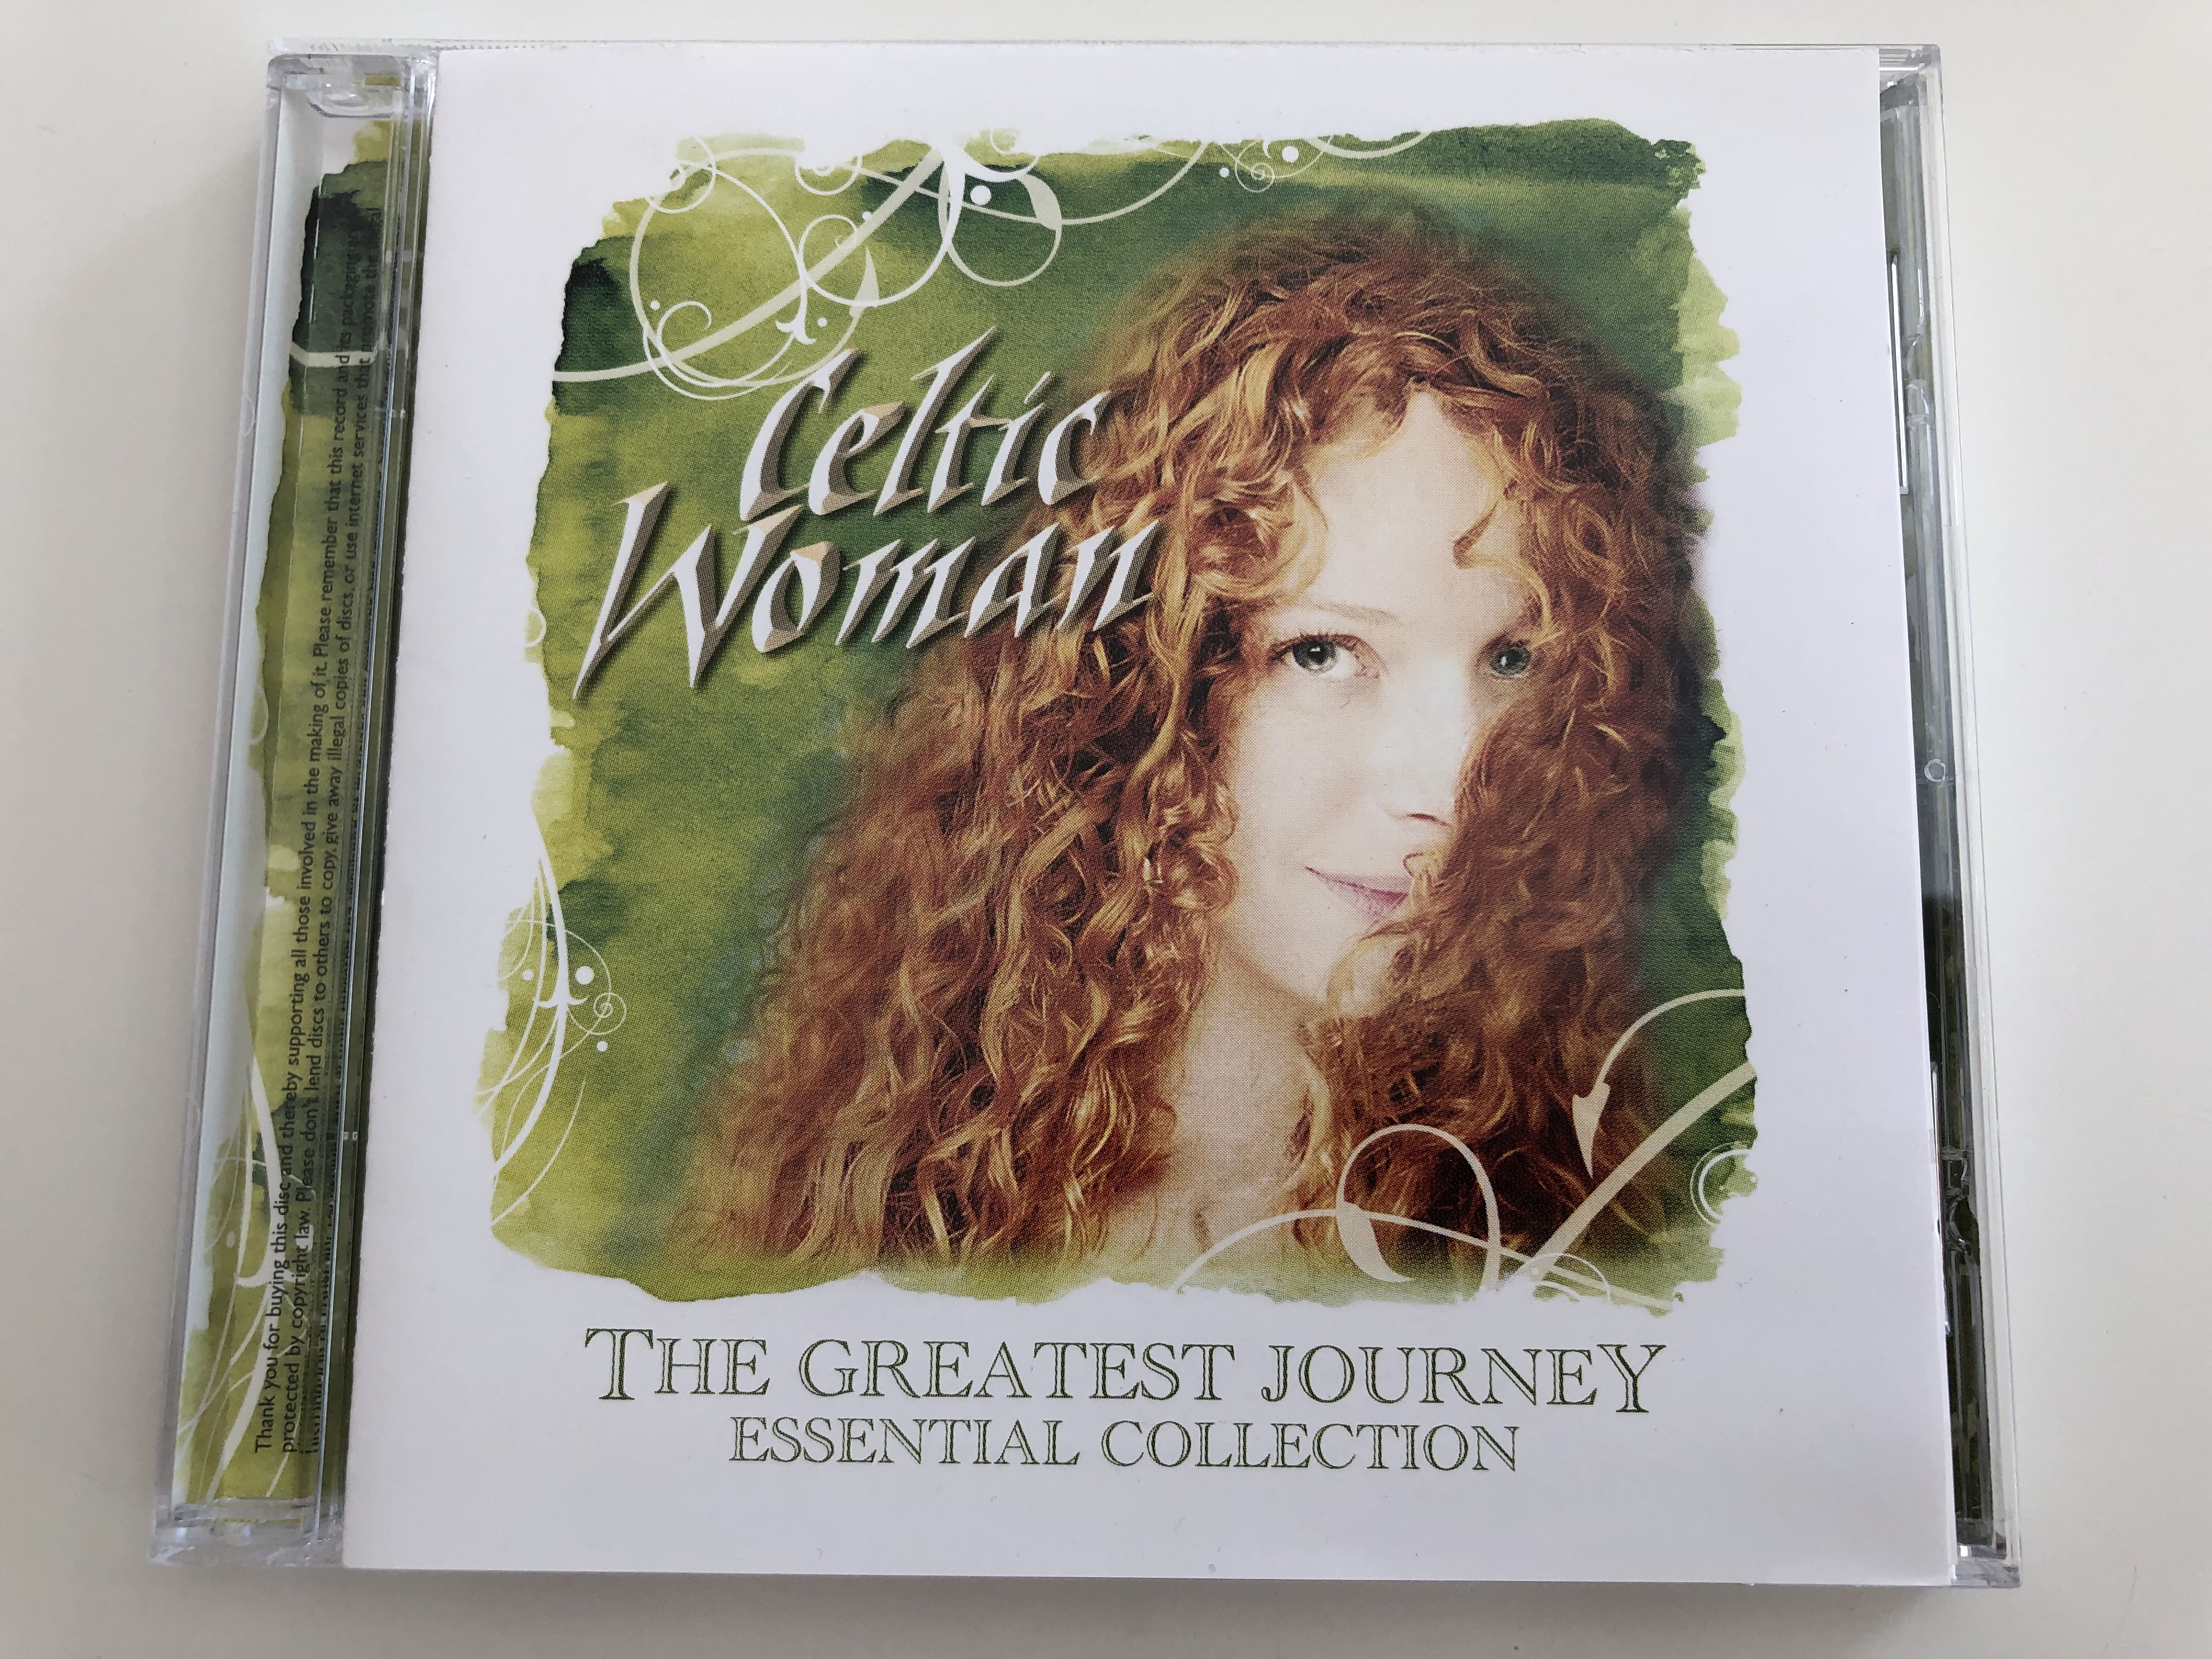 celtic-woman-the-greatest-journey-essential-collection-emi-audio-cd-2008-1-.jpg